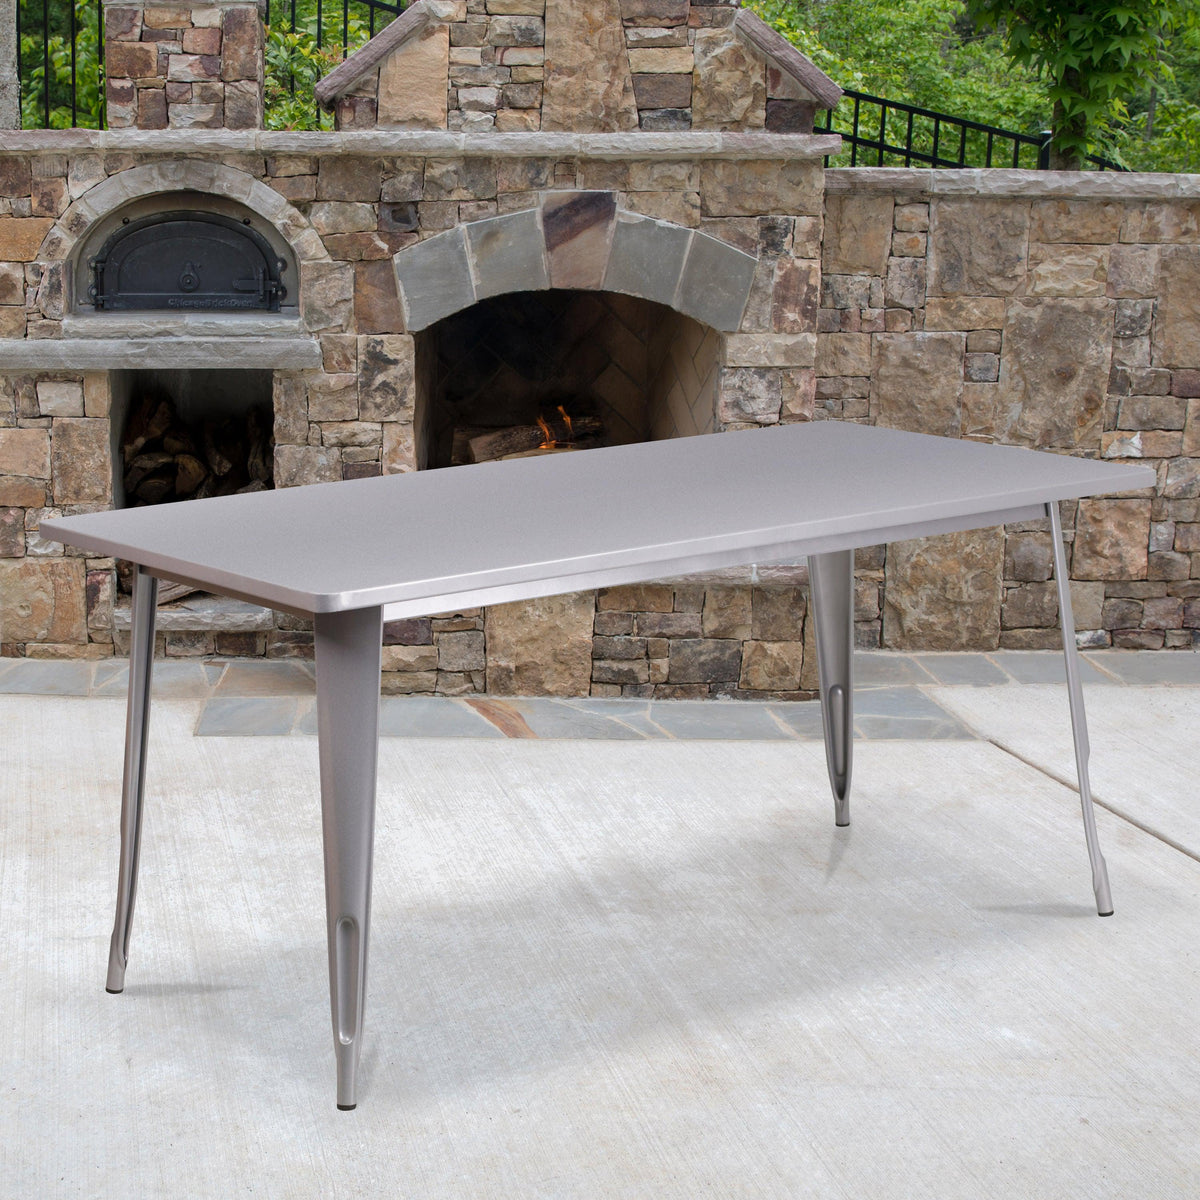 Silver |#| 31.5inch x 63inch Rectangular Silver Metal Indoor-Outdoor Table - Industrial Table